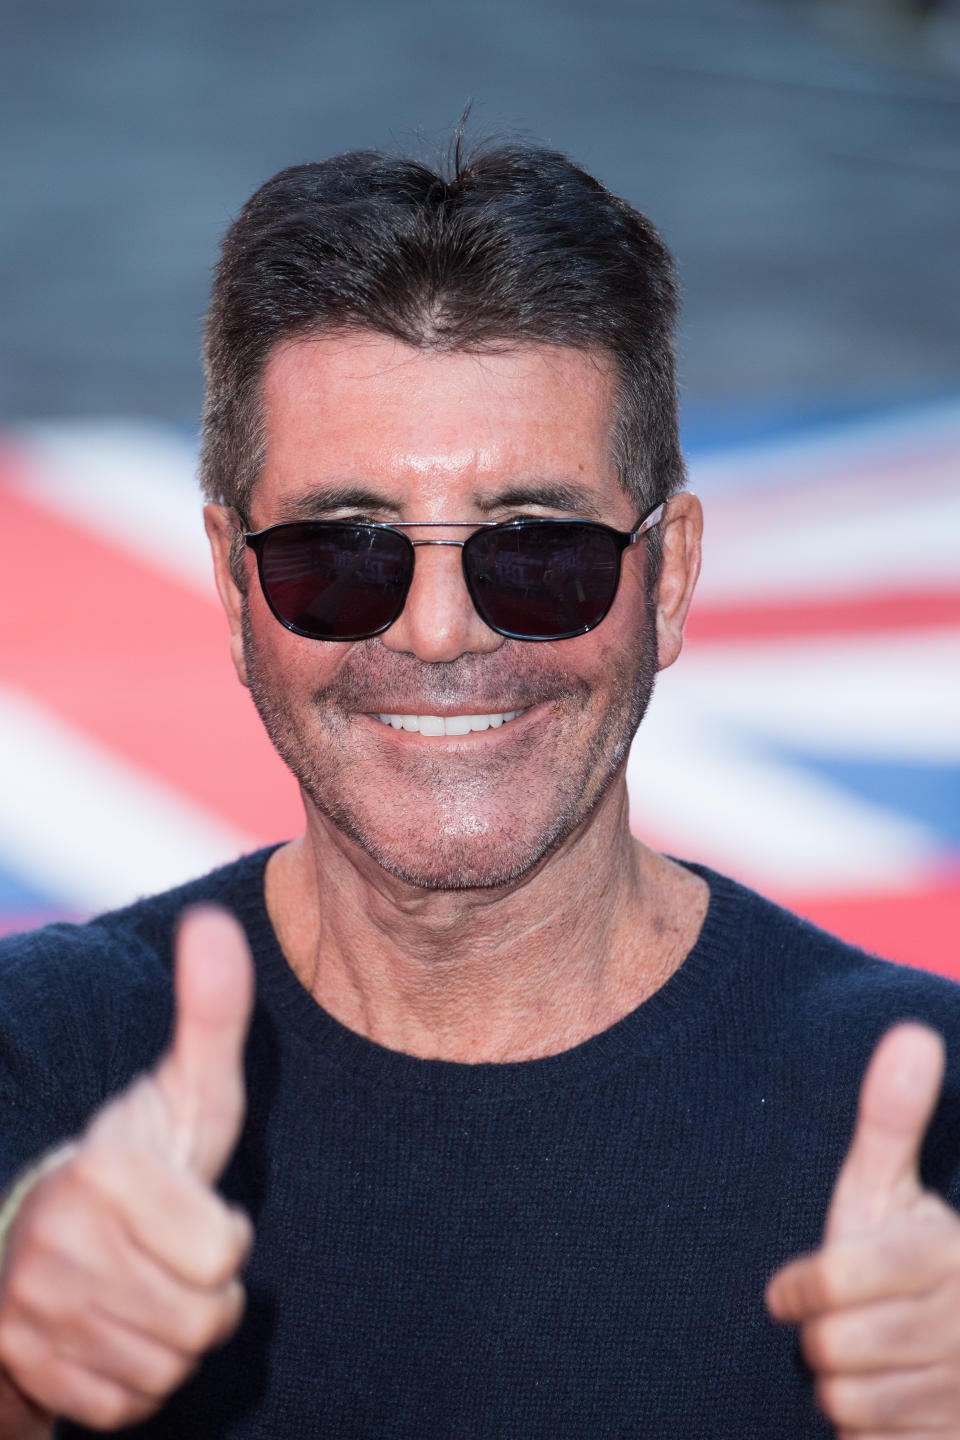 Simon Cowell attends the Britain's Got Talent 2020 photocall at London Palladium on January 19, 2020 in London, England. (Photo by Jeff Spicer/WireImage)